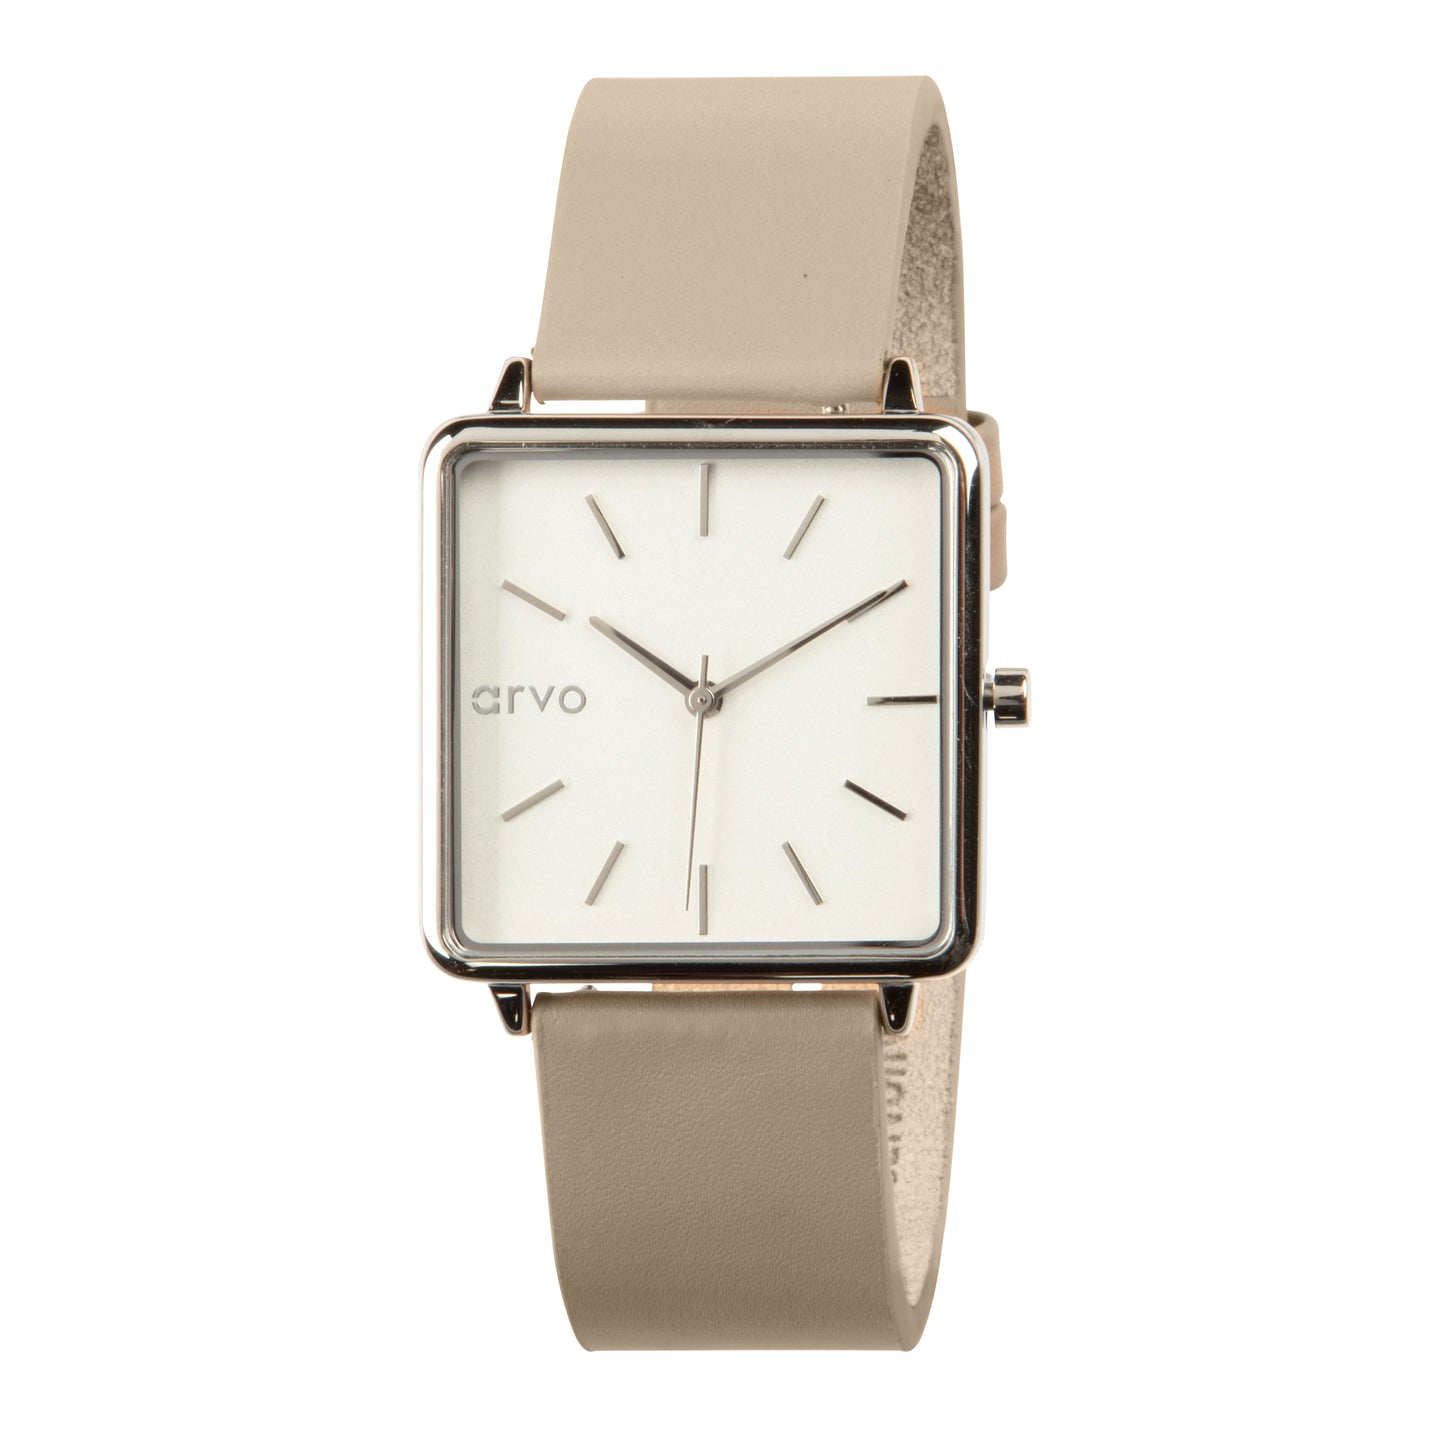 Arvo Time Squared Watch - Silver - Nude Leather Band